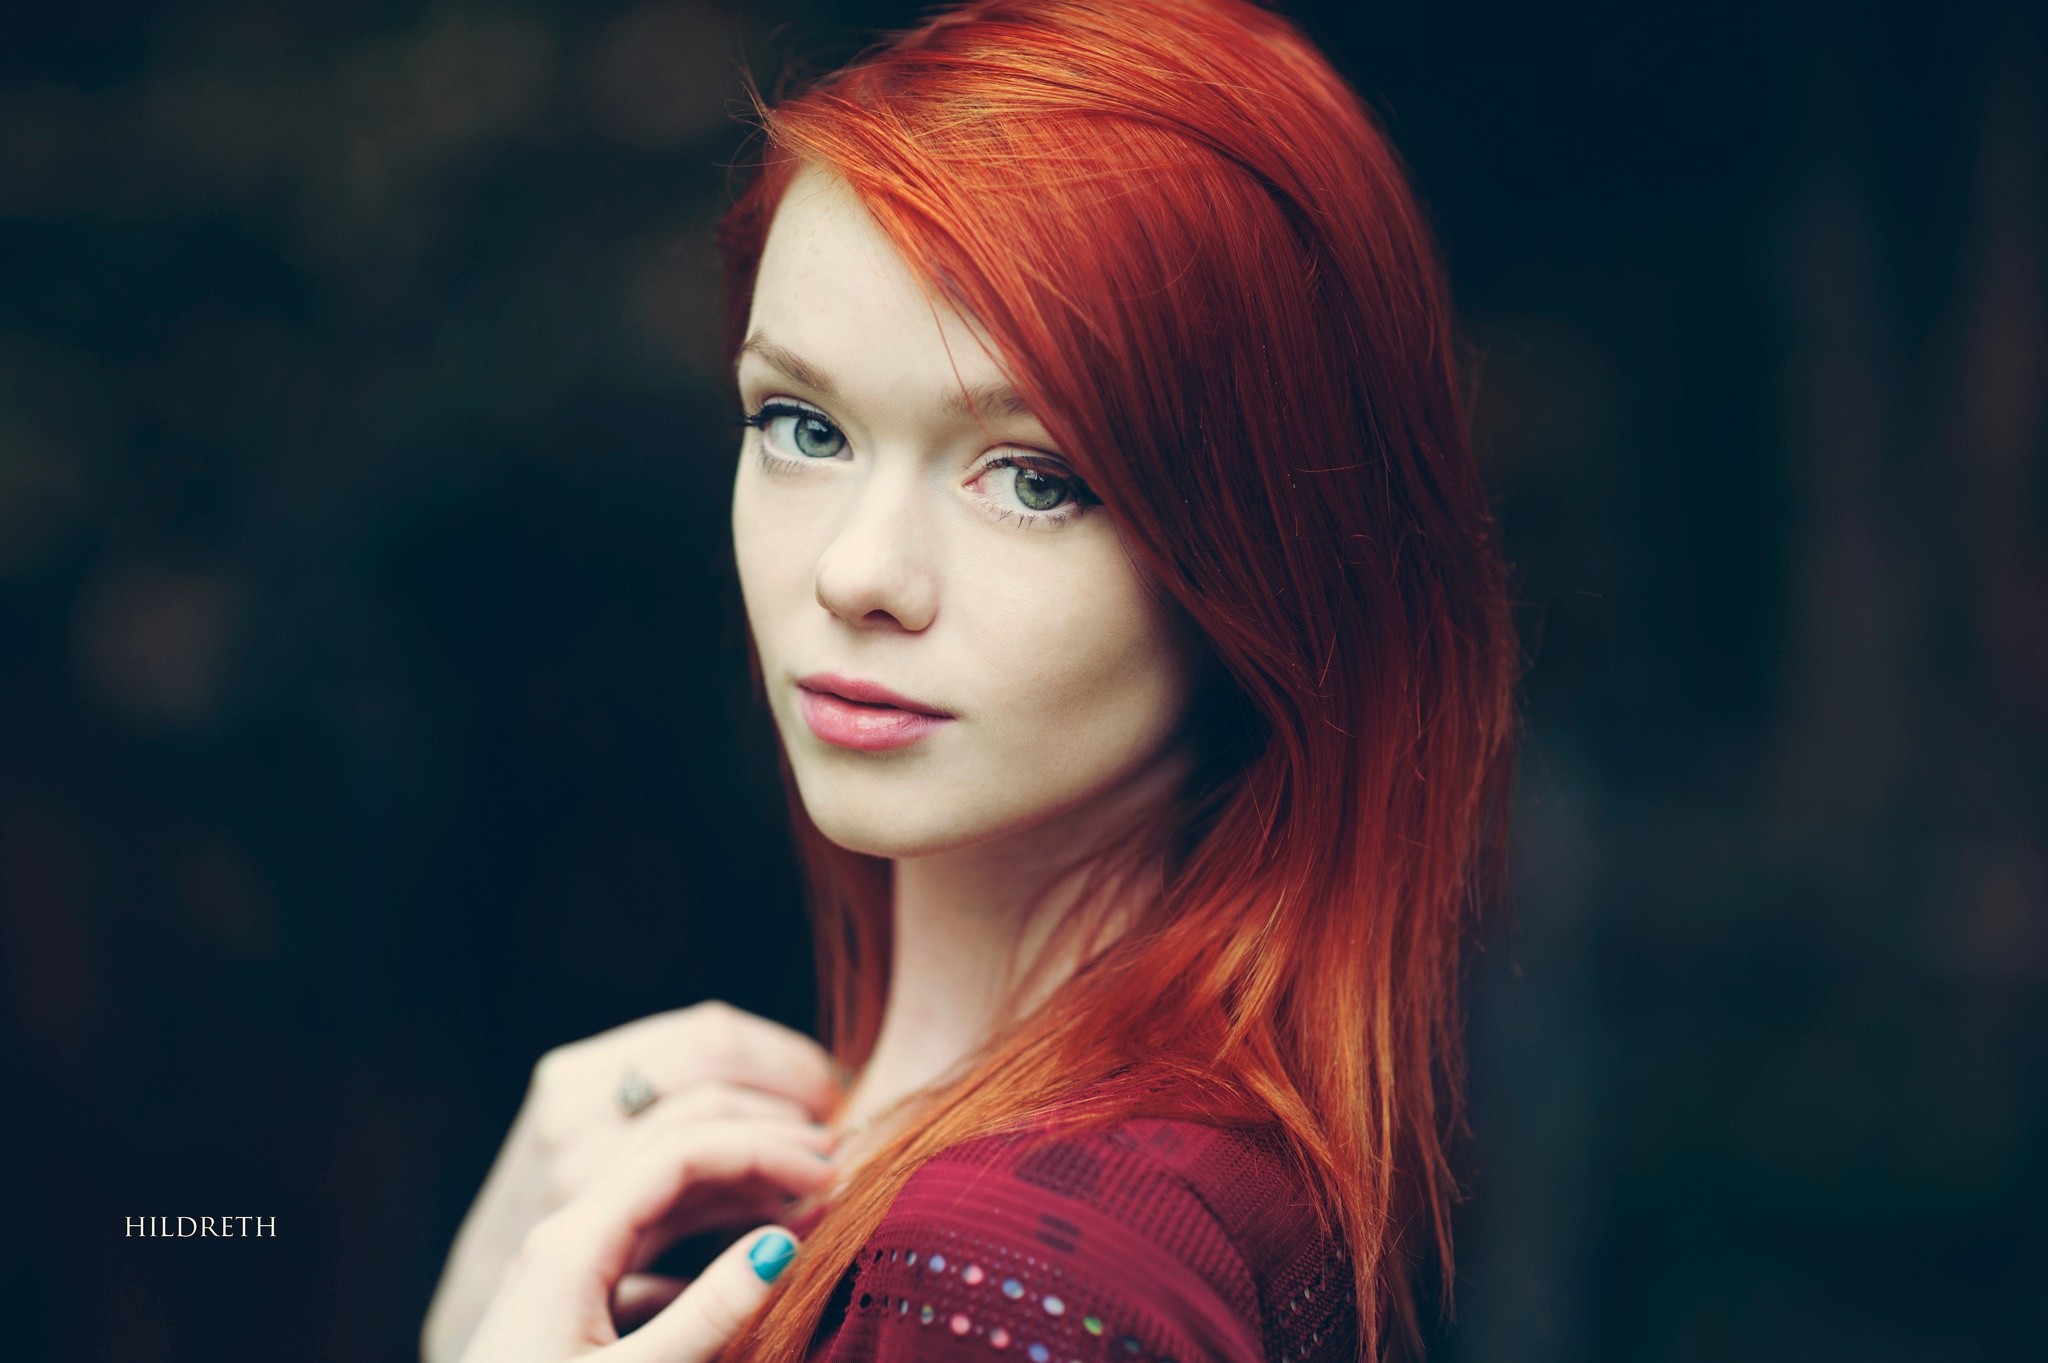 carolyne kong recommends hot redheads on tumblr pic